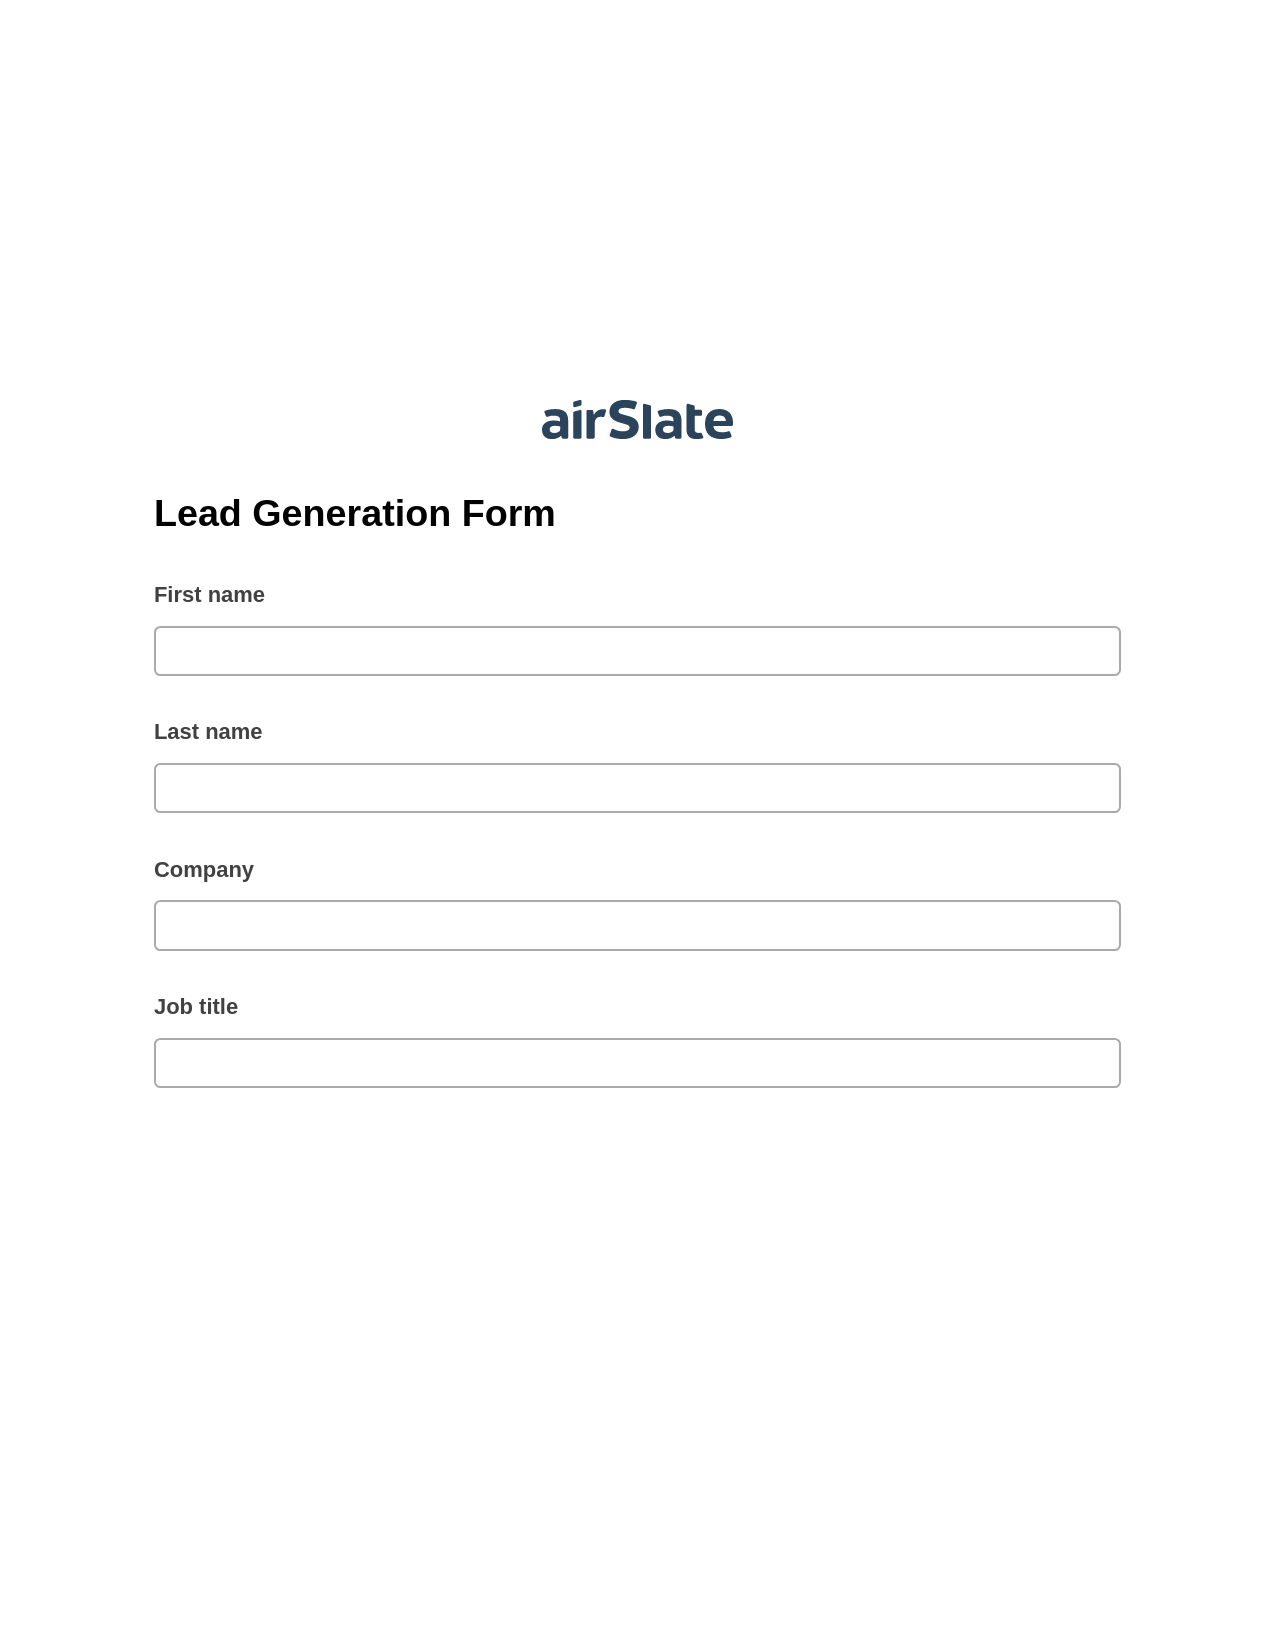 Lead Generation Form Pre-fill from Excel Spreadsheet Bot, Add Tags to Slate Bot, Archive to Google Drive Bot